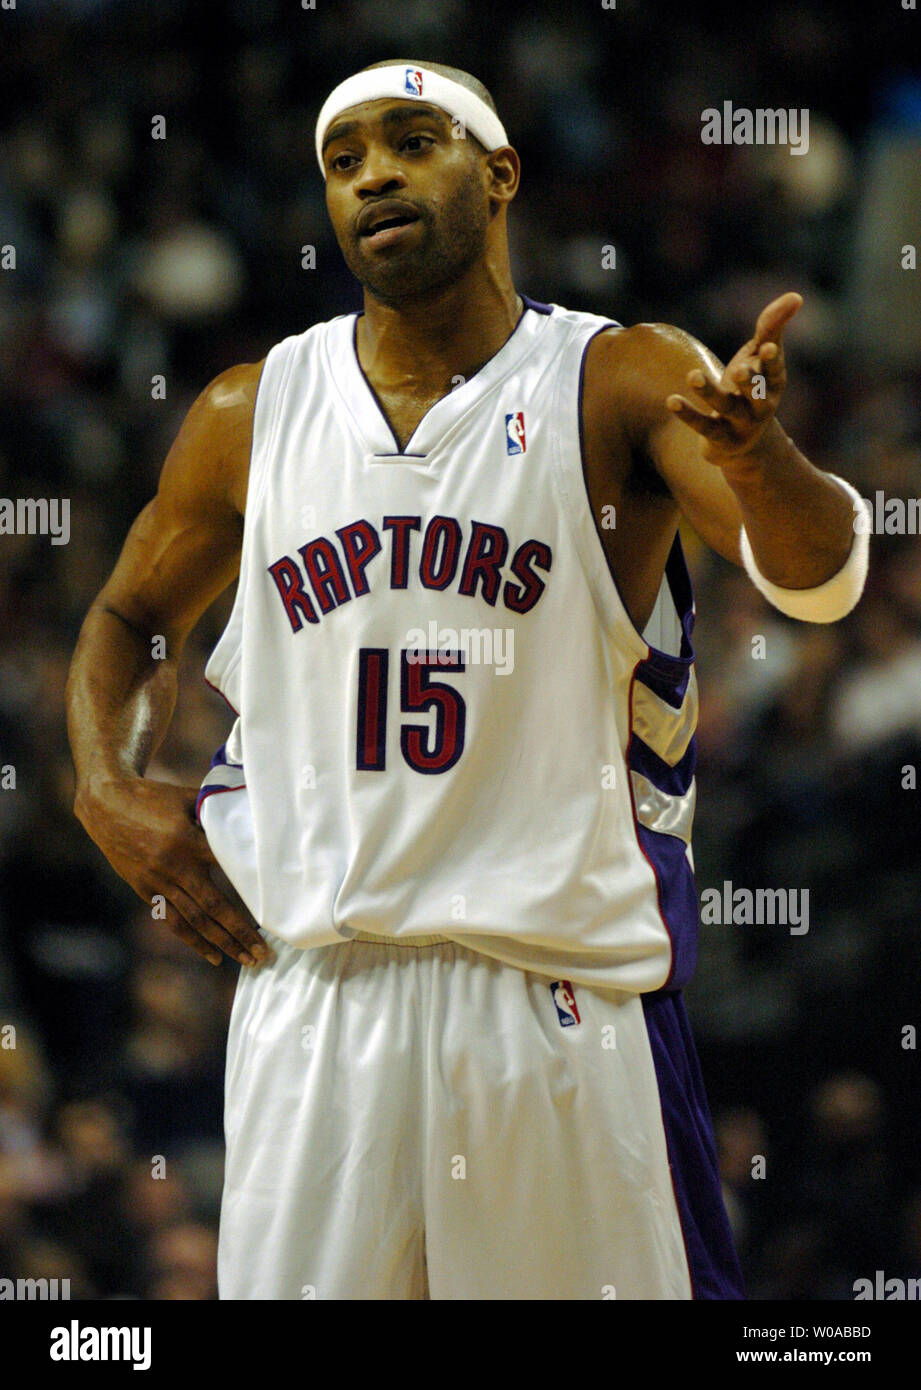 NBA Canada on X: Vince Carter has officially become the FIRST